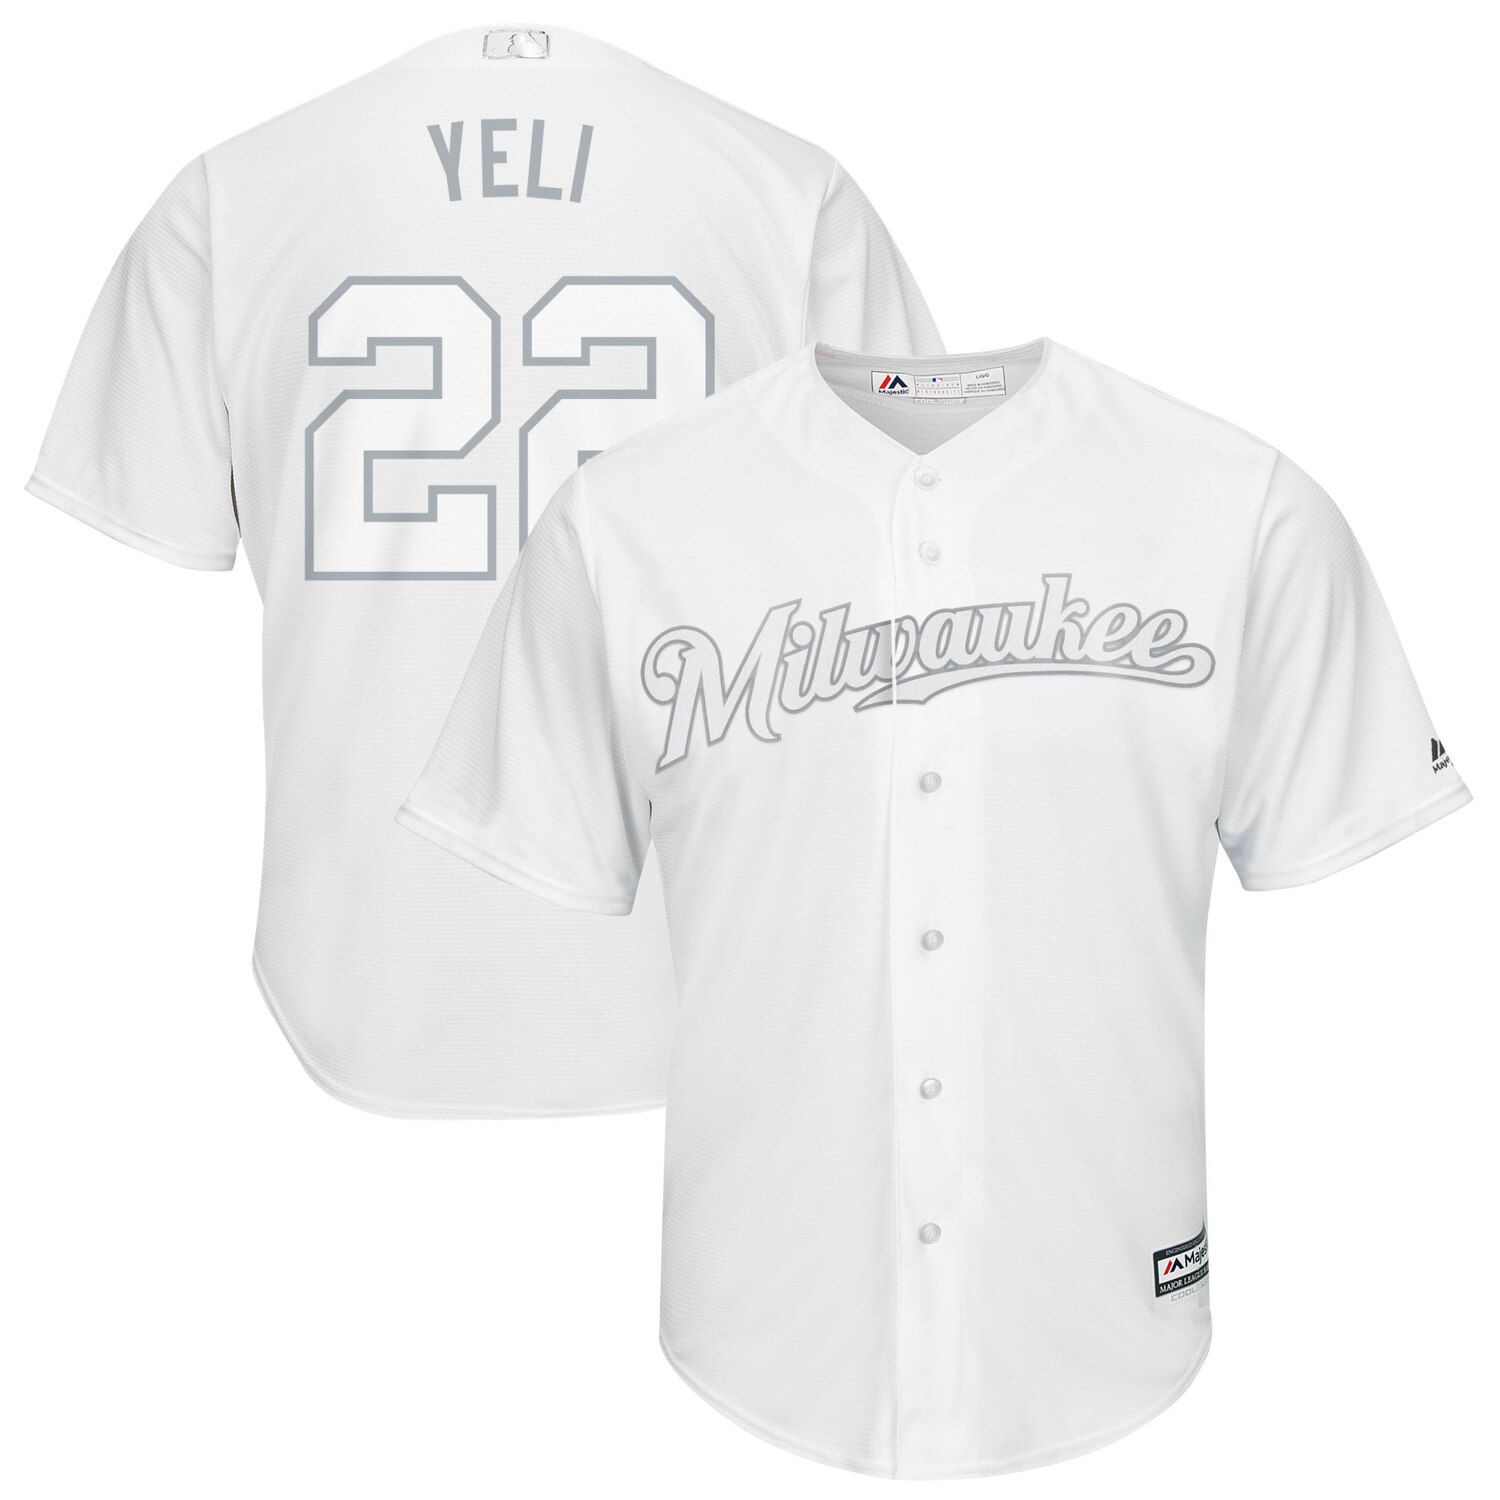 yelich players weekend jersey